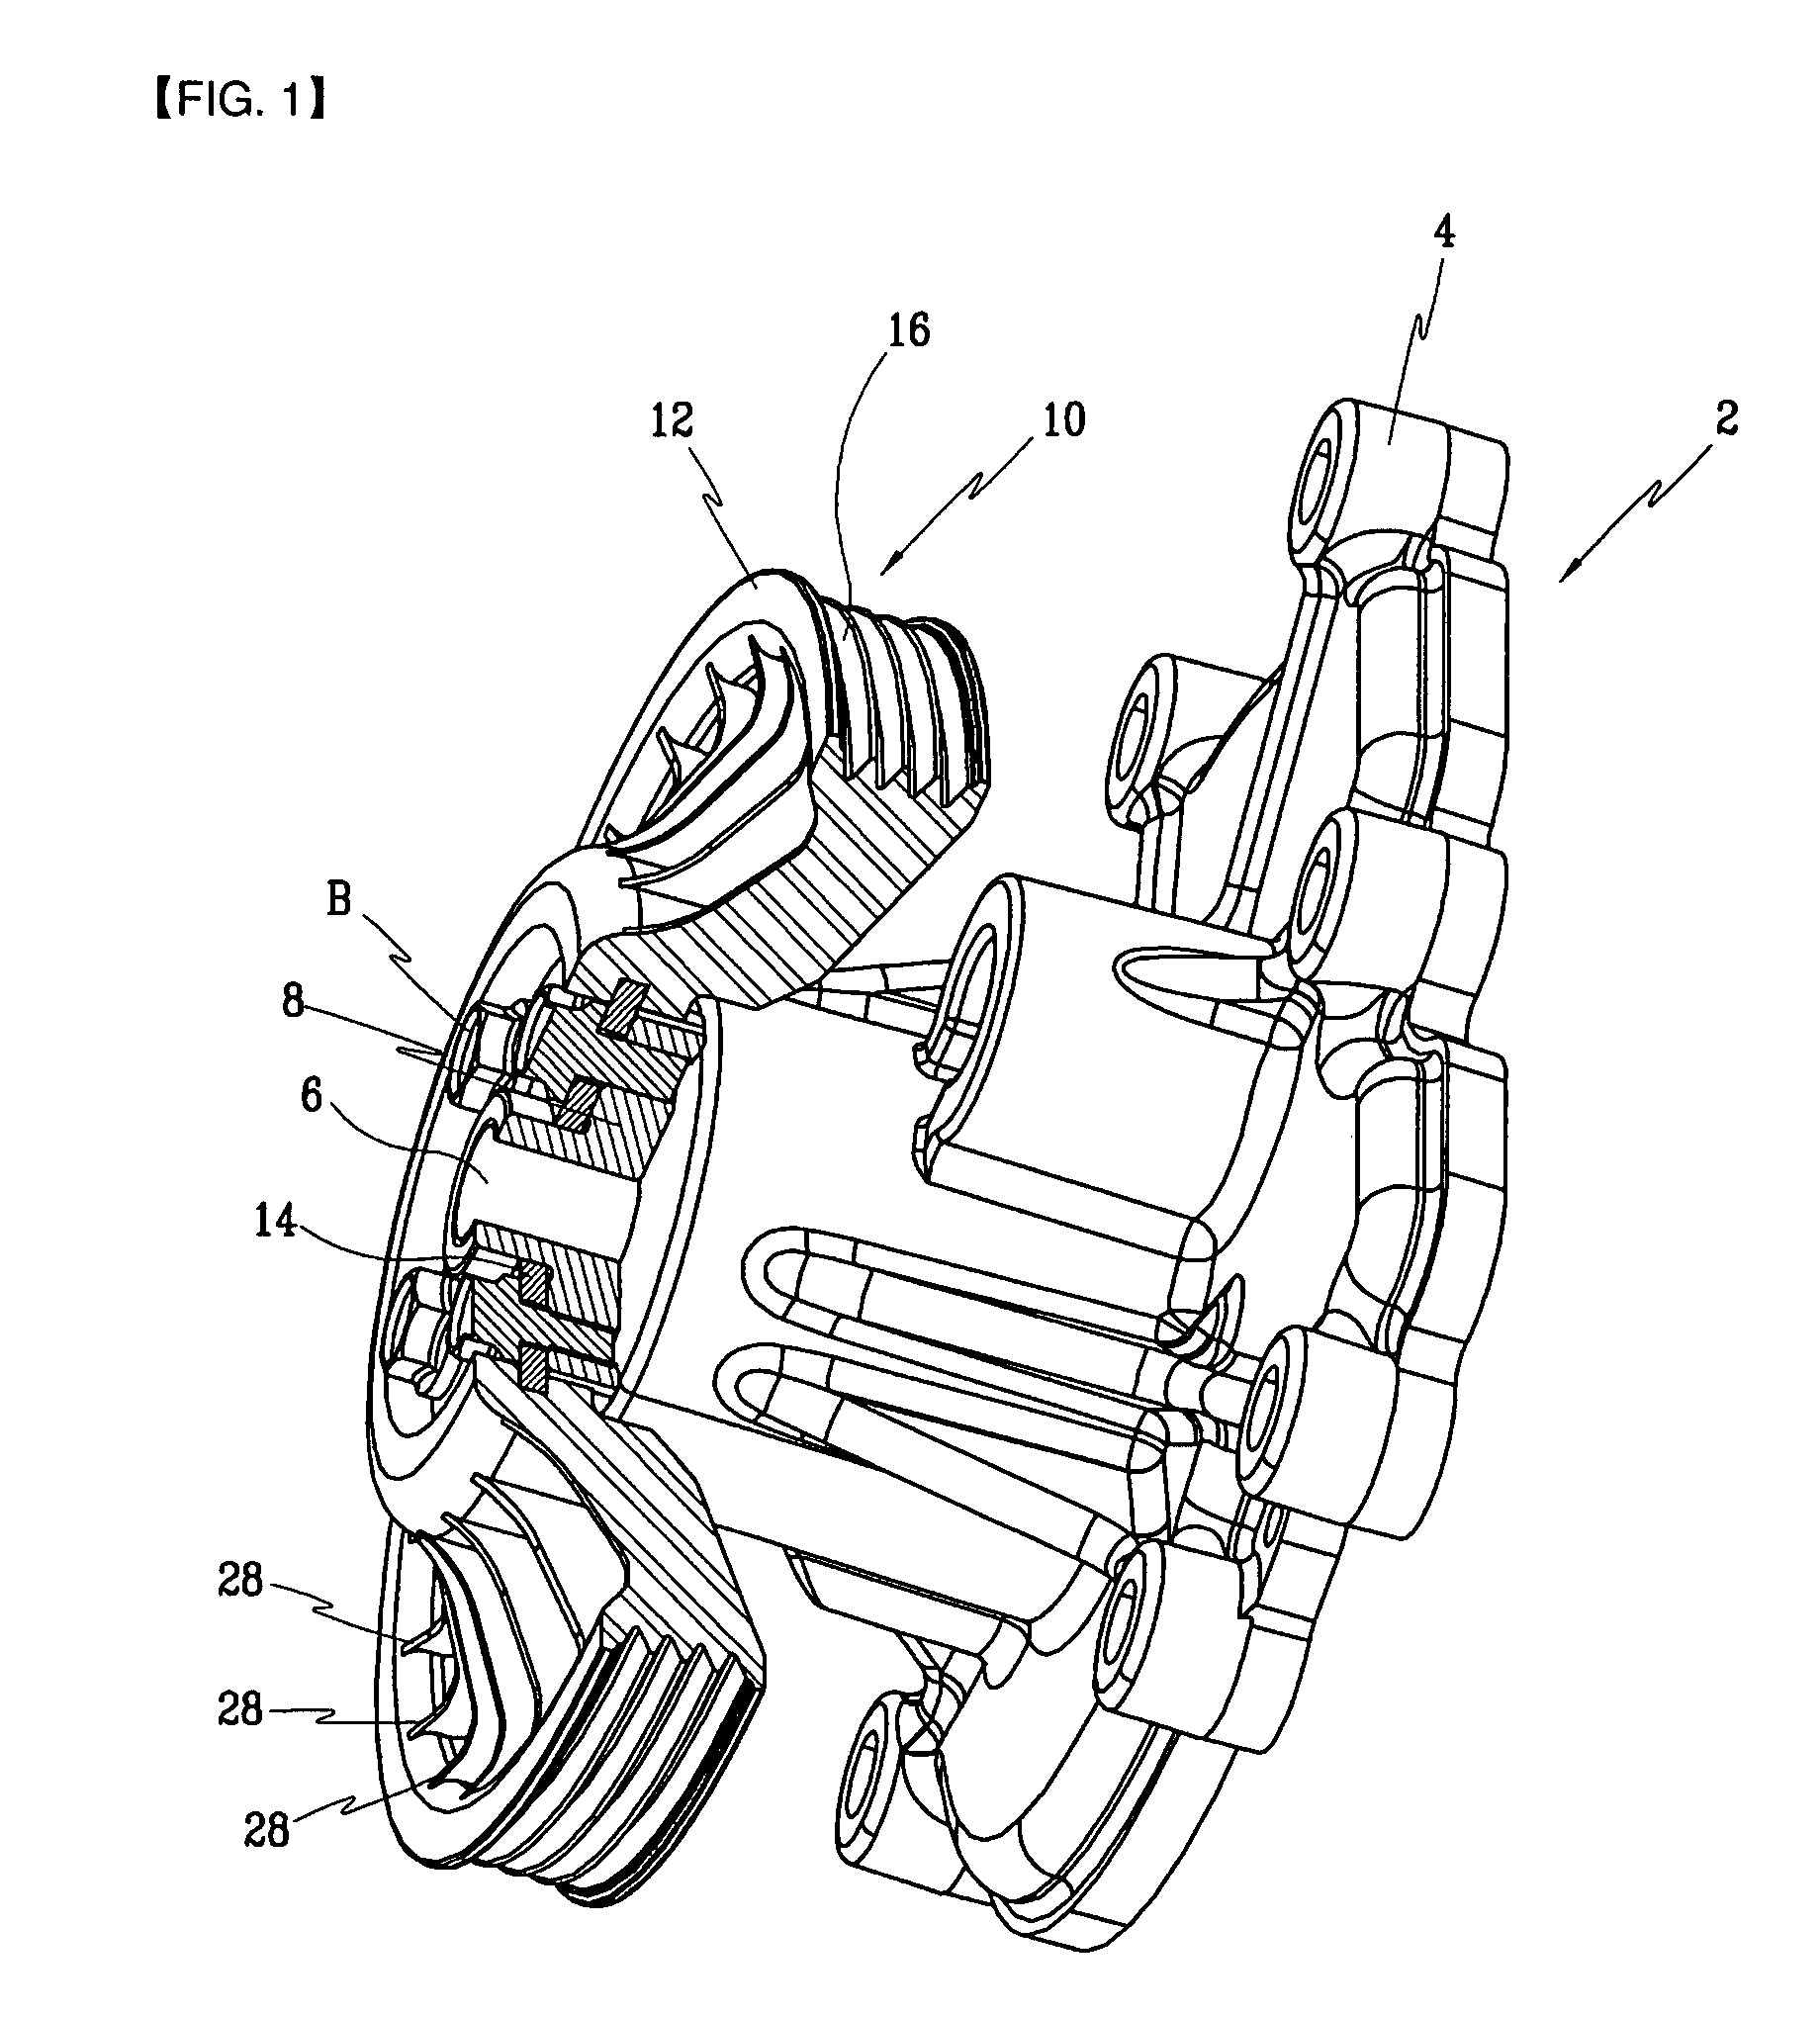 Water pump pulley for cooling system of vehicle